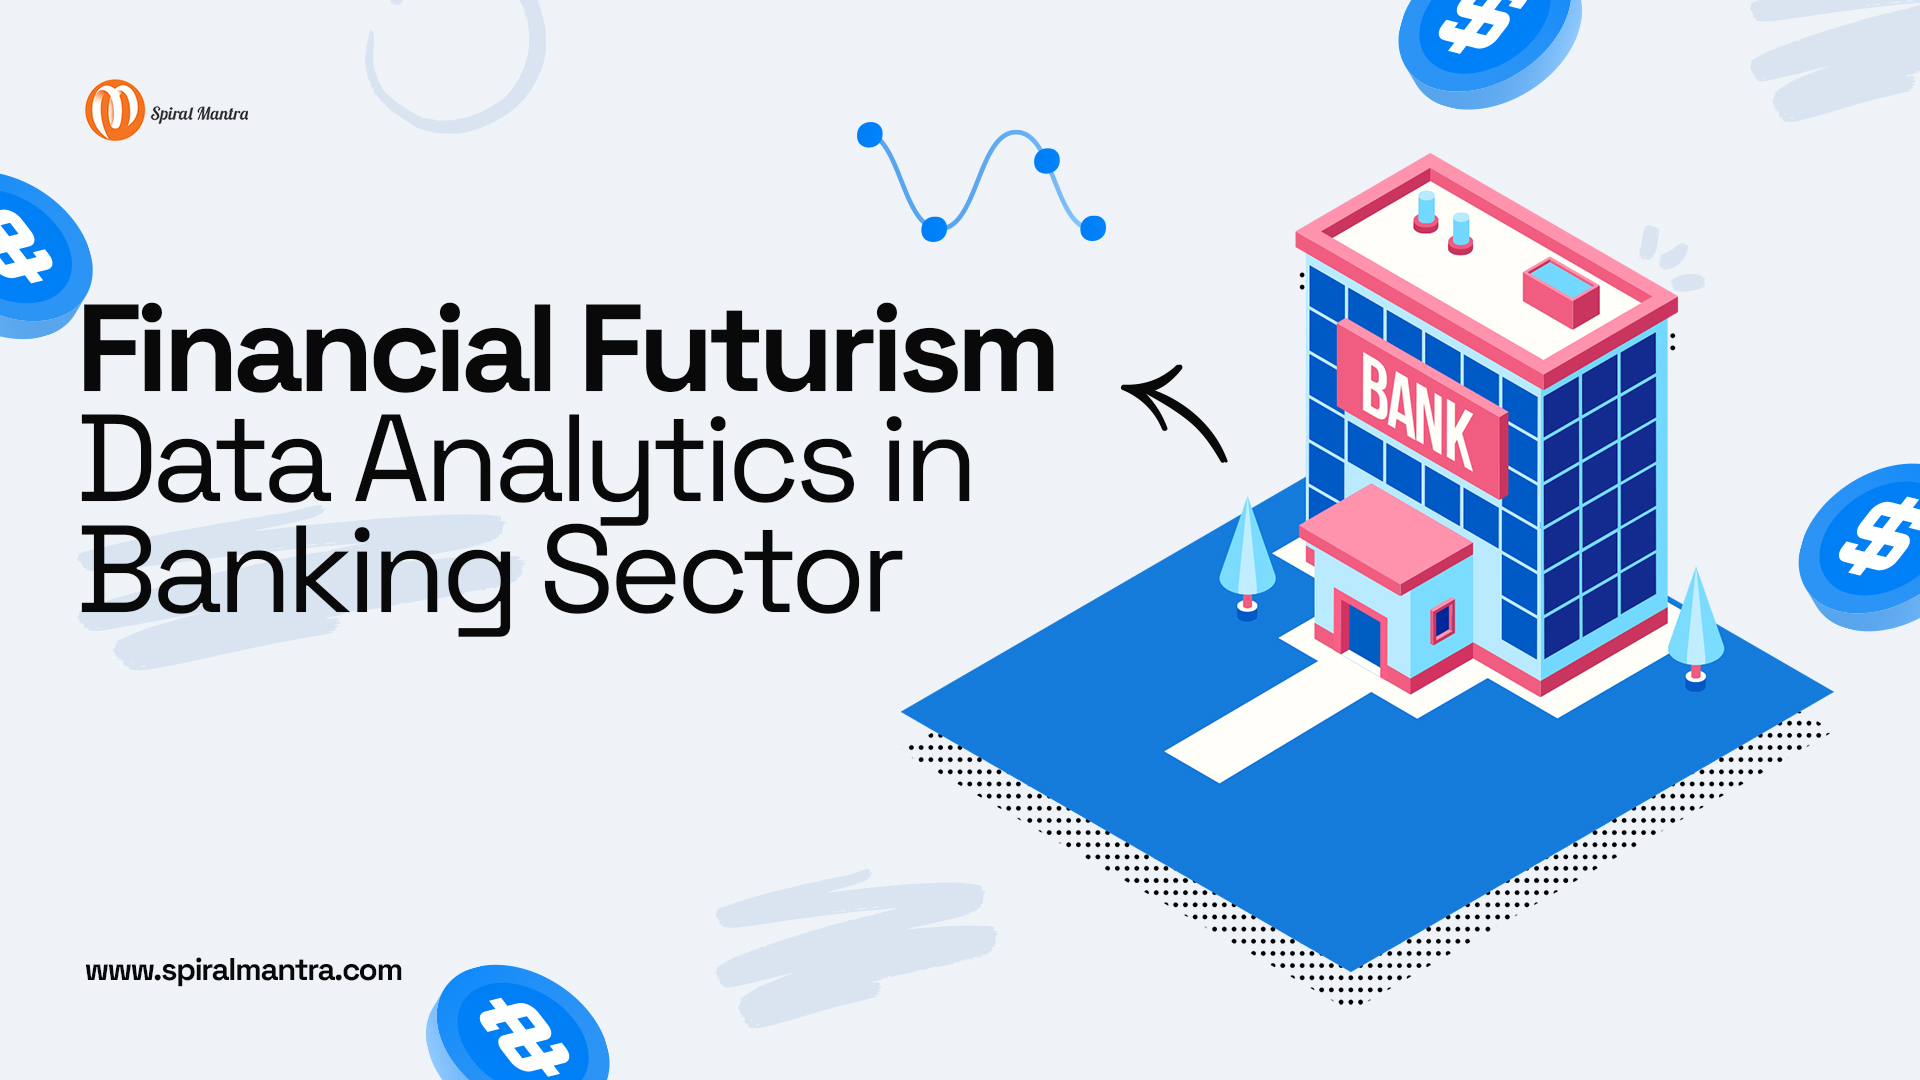 Financial Futurism: Data Analytics in the Banking Sector